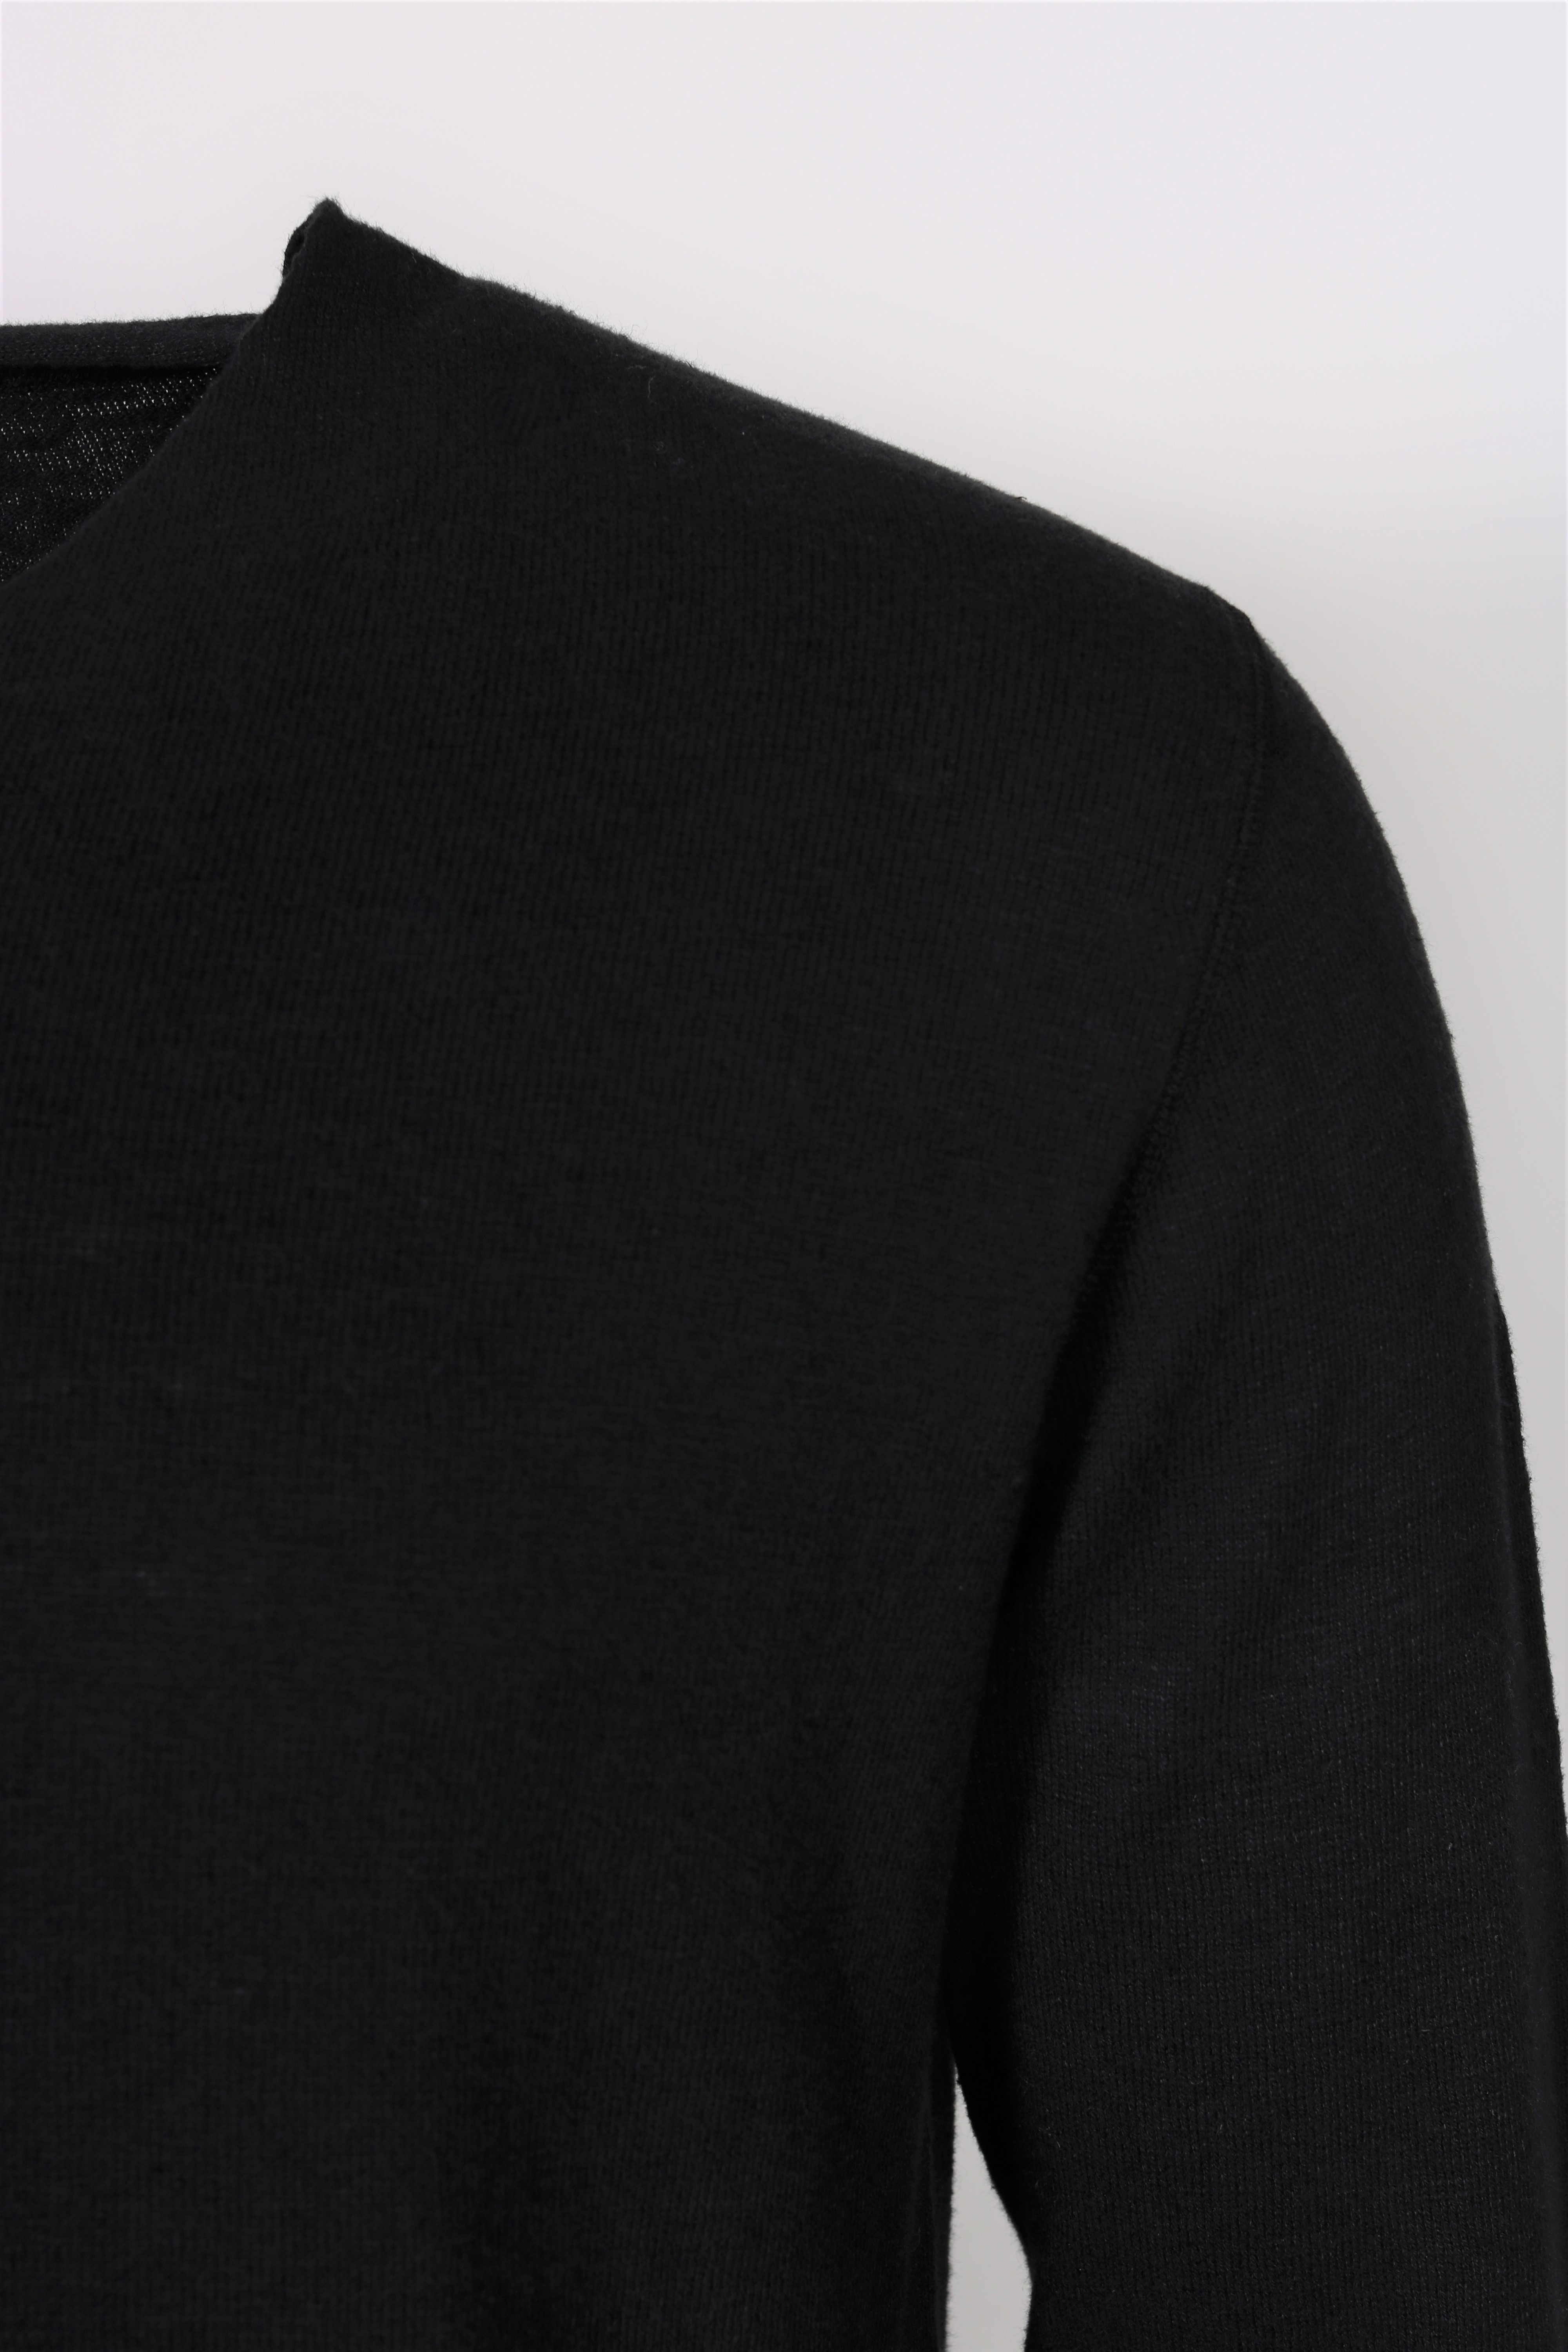 Hannes Roether V-Neck Knit Sweater in Black